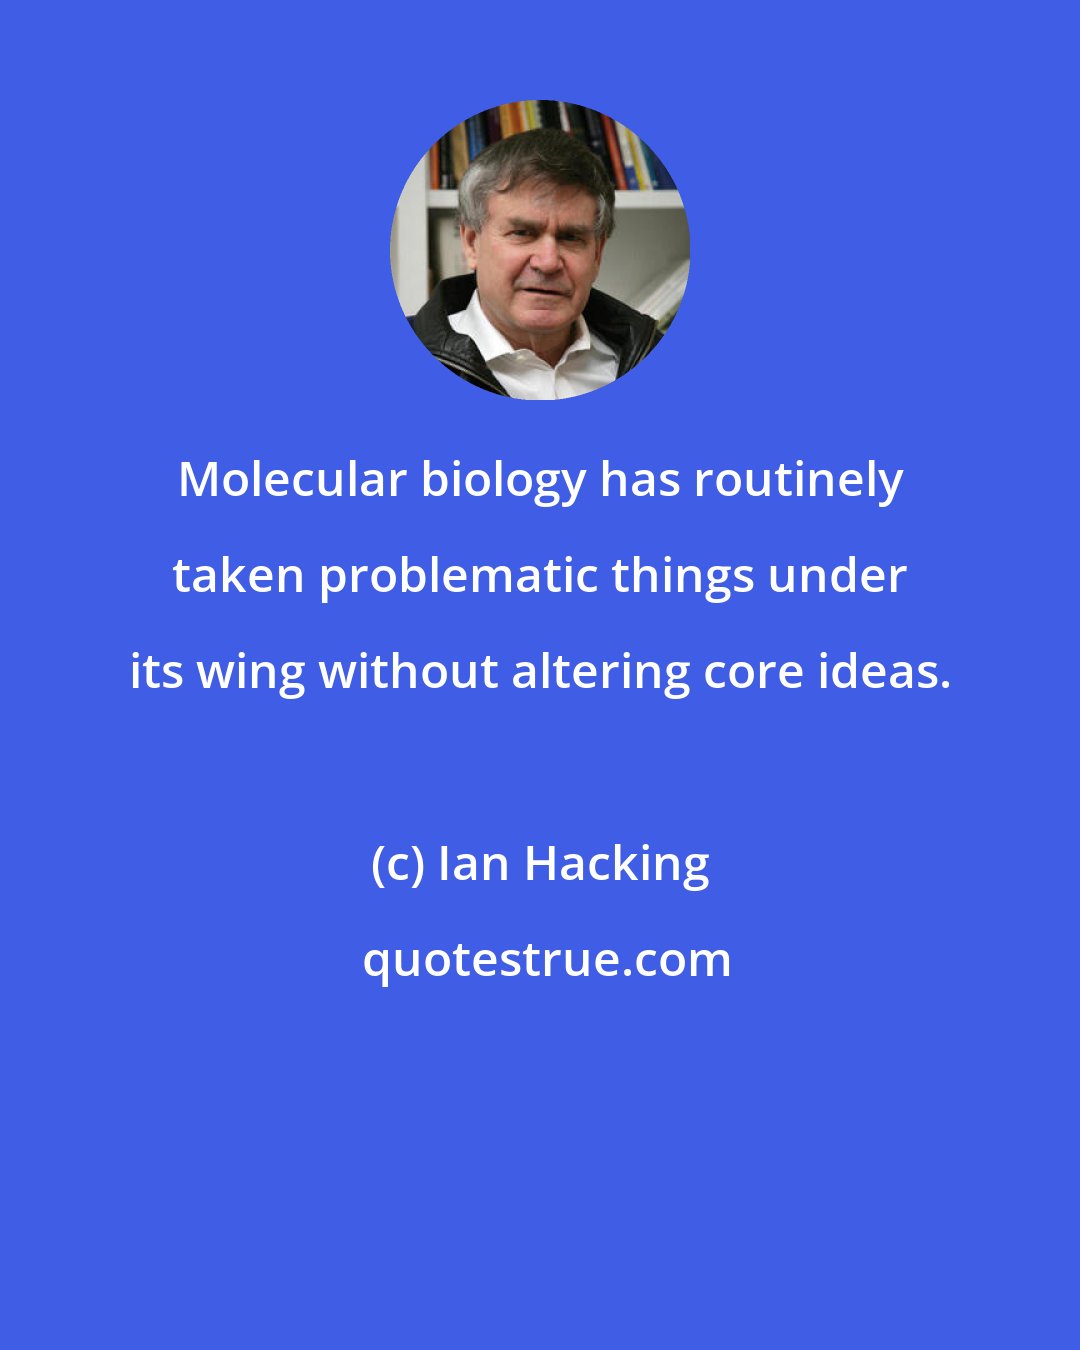 Ian Hacking: Molecular biology has routinely taken problematic things under its wing without altering core ideas.